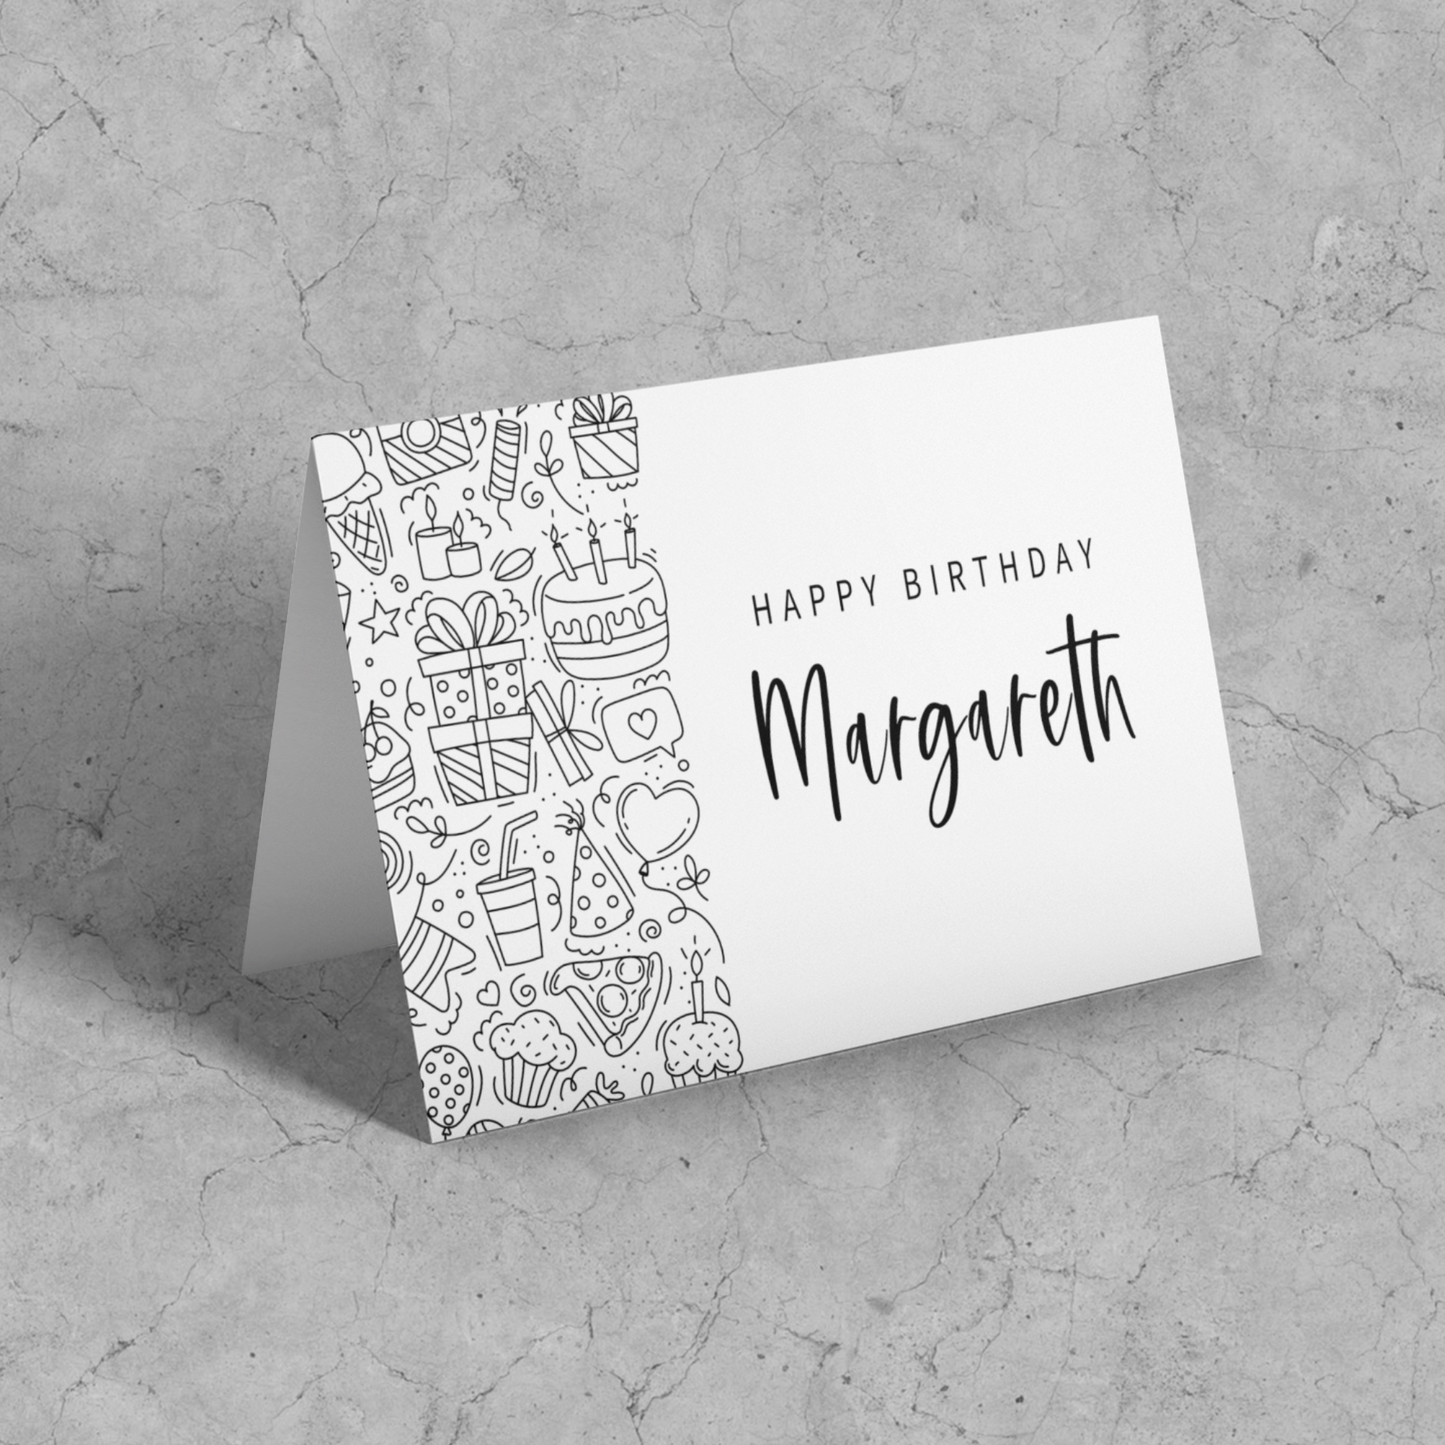 Personalized Happy Birthday Greeting Card for a Friend